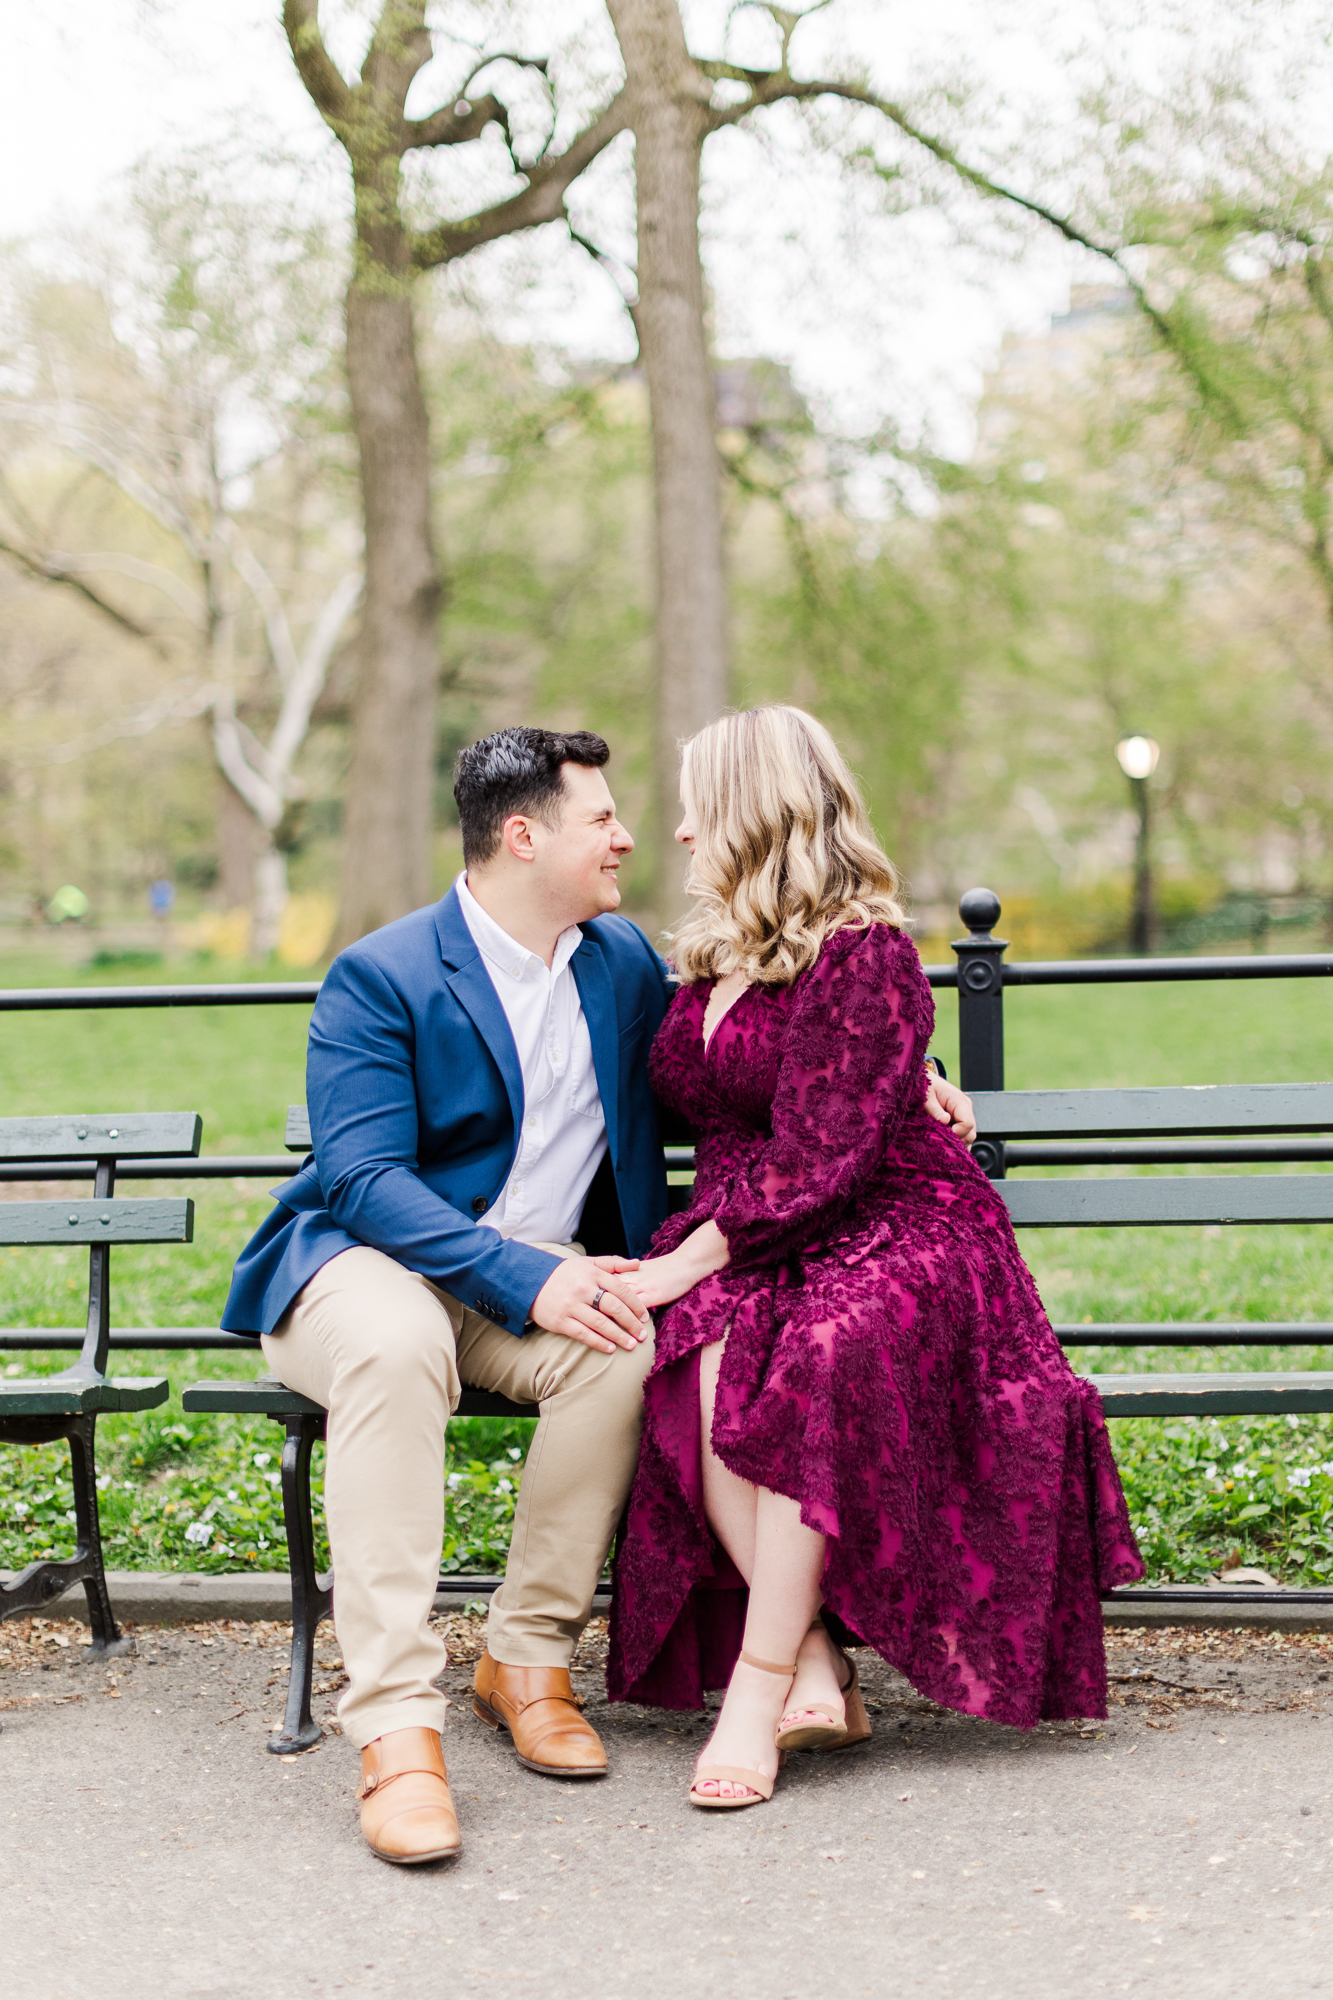 Perfect Engagement Pictures in Central Park